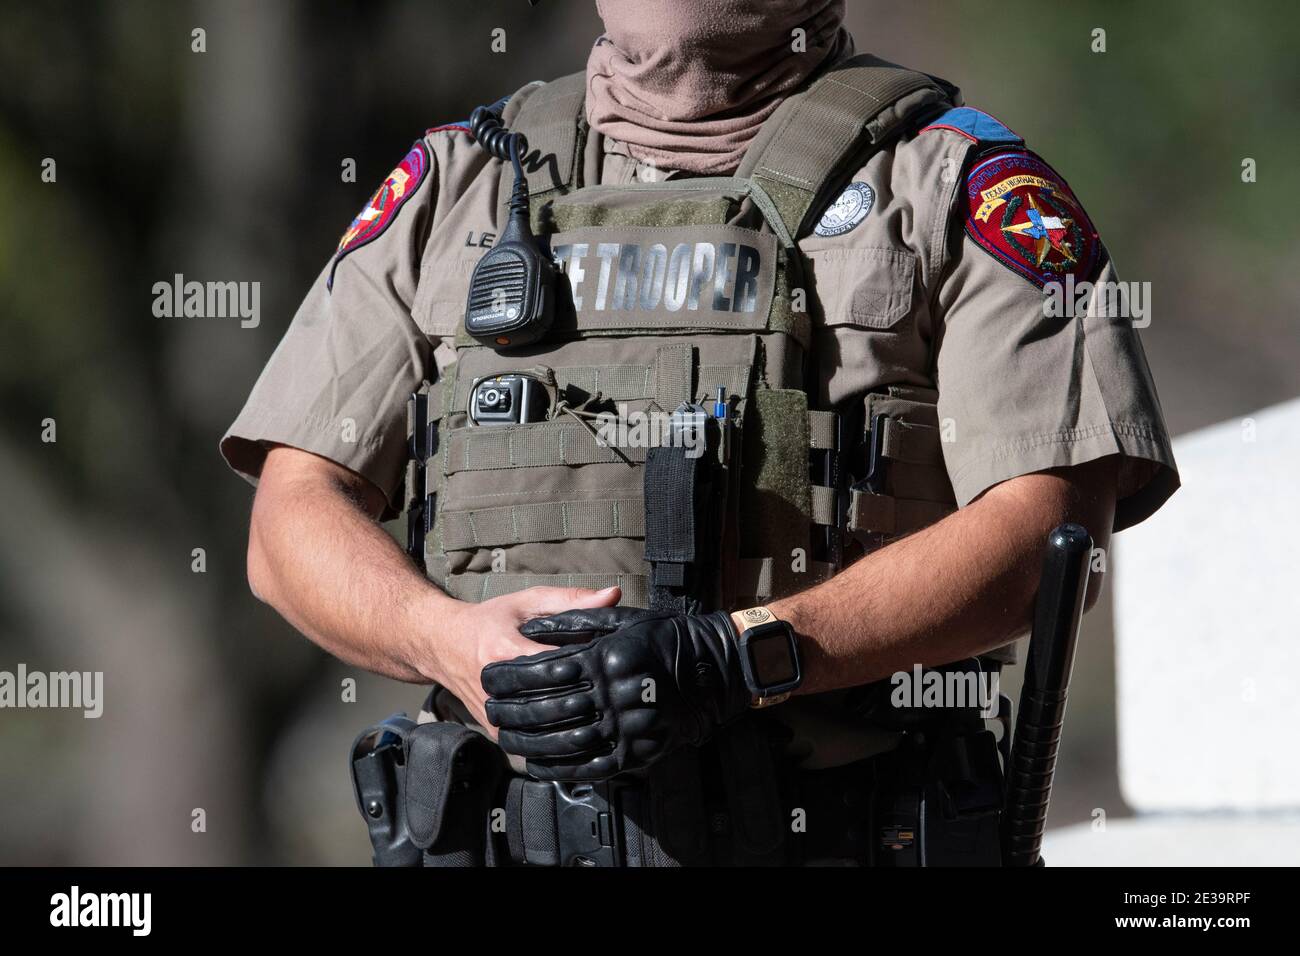 Austin, TX USA Jan. 17th, 2021: Texas Dept. of Public Safety trooper wearing a bulletproof vest stands guard on the Texas Capitol grounds as armed Texas militia members gathered at the Capitol in a show of force ahead of the inauguration of President Joe Biden on Wednesday. Most militia members argued in favor of their right under the 2nd Amendment to carry guns, not necessarily in support of outgoing president Donald Trump. Credit: Bob Daemmrich/Alamy Live News Stock Photo